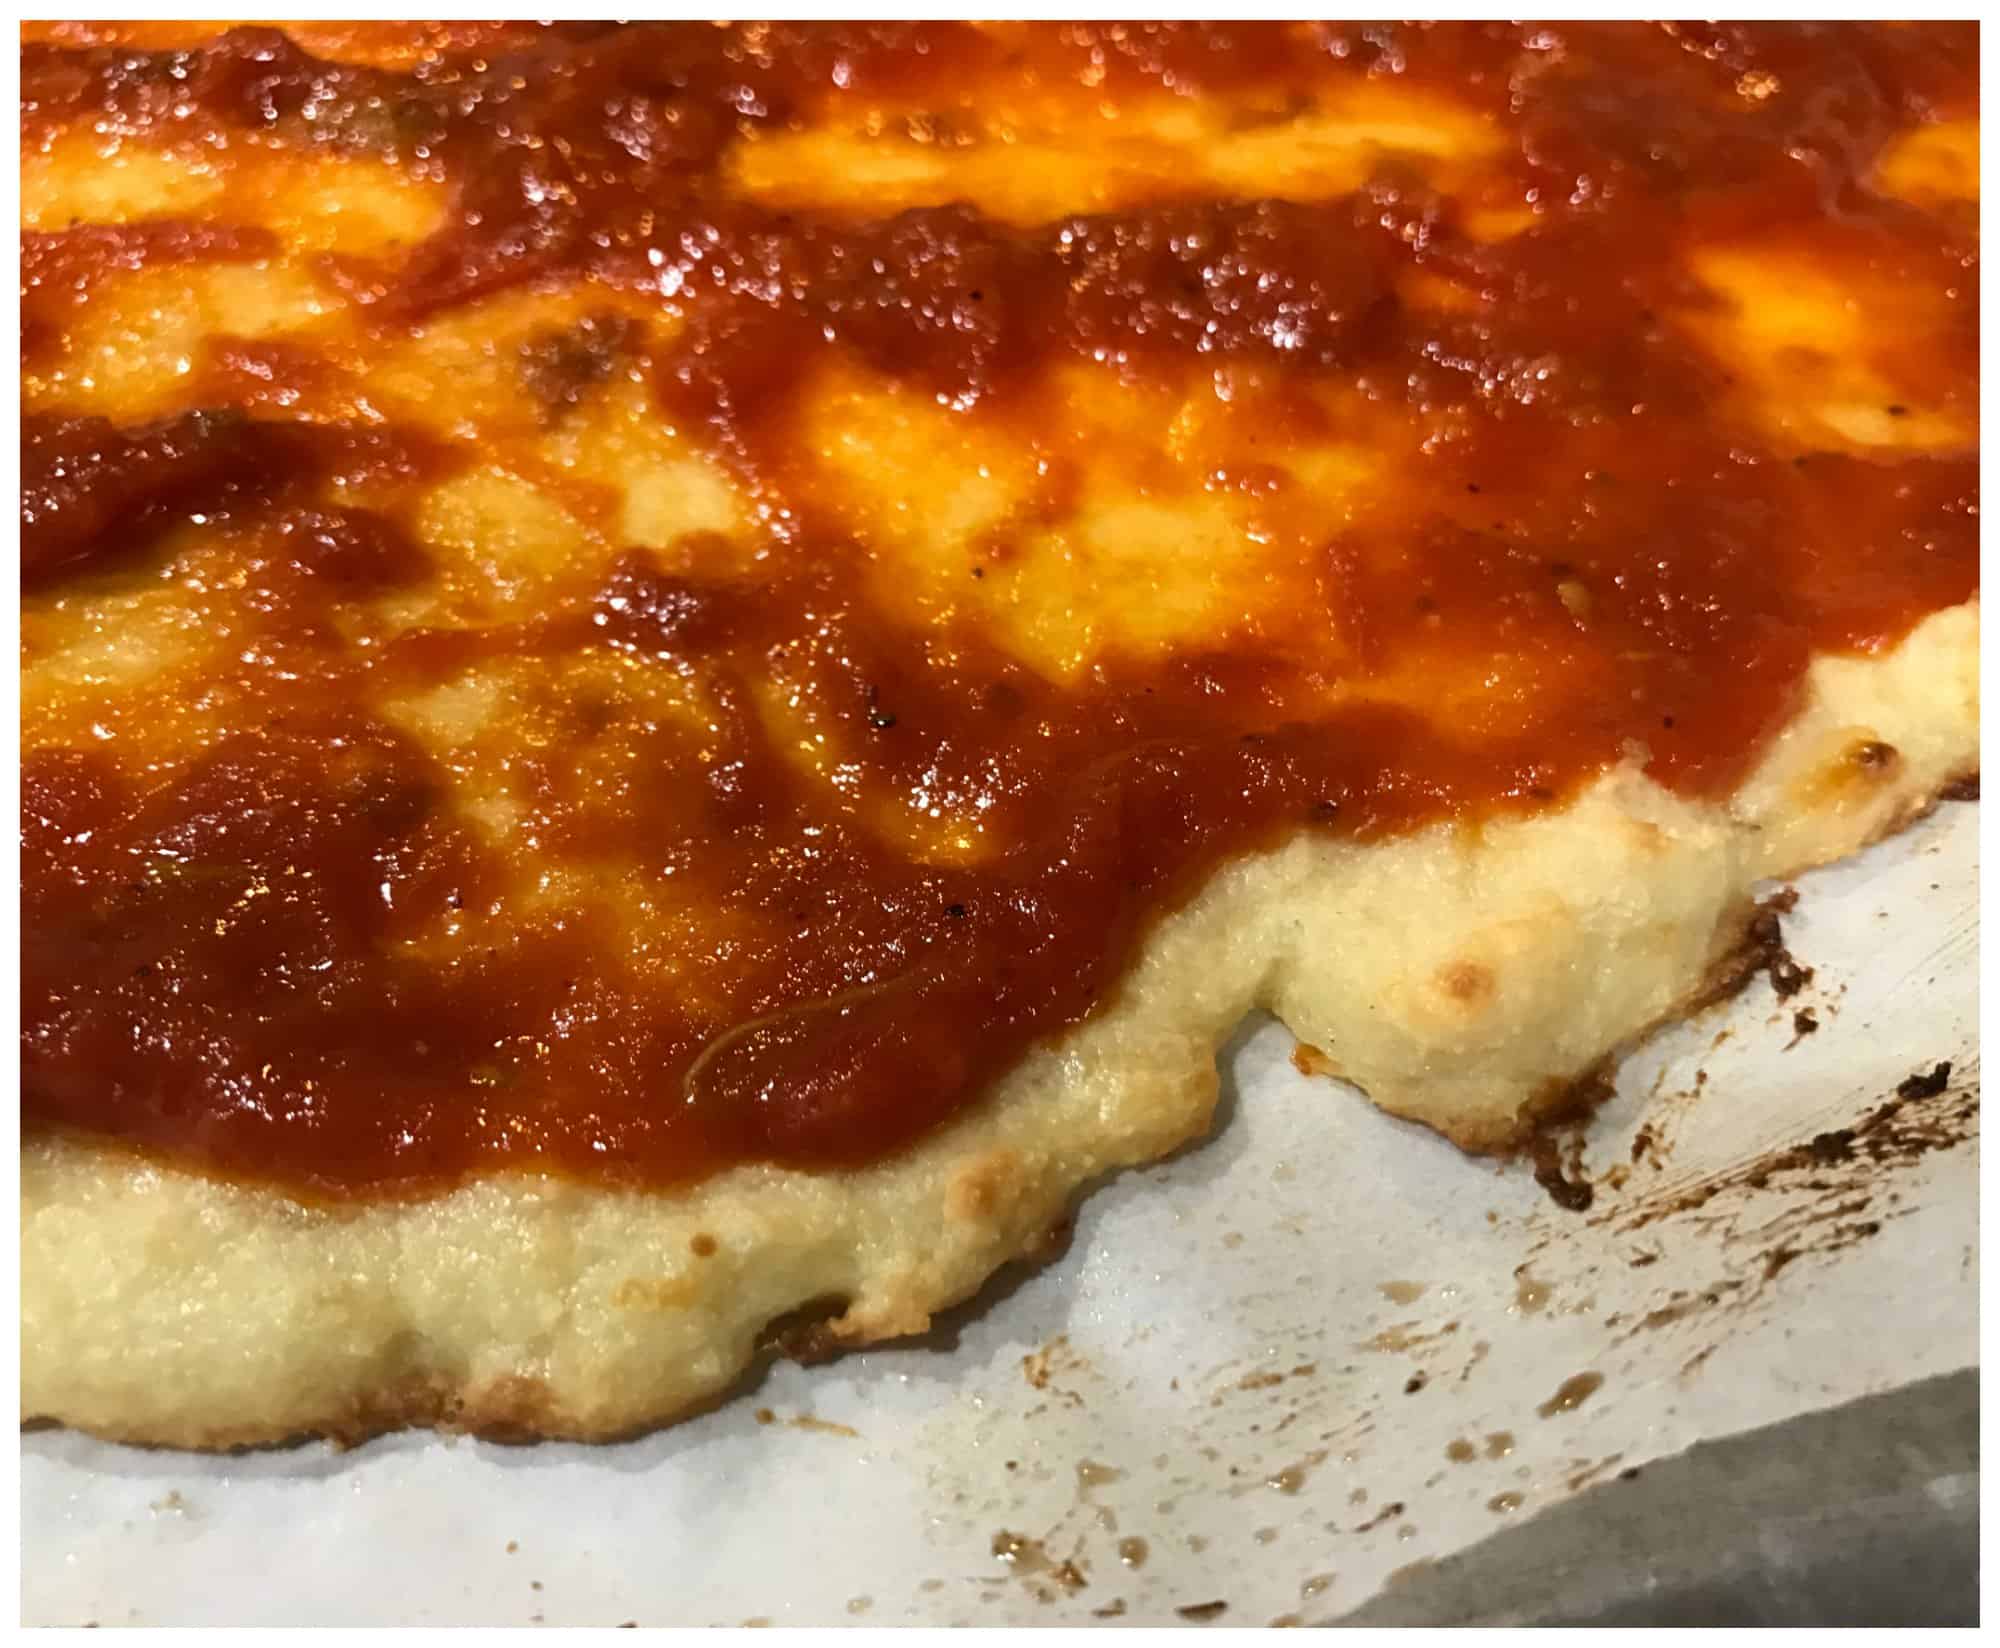 Best Low Carb Keto Friendly Pizza Recipe